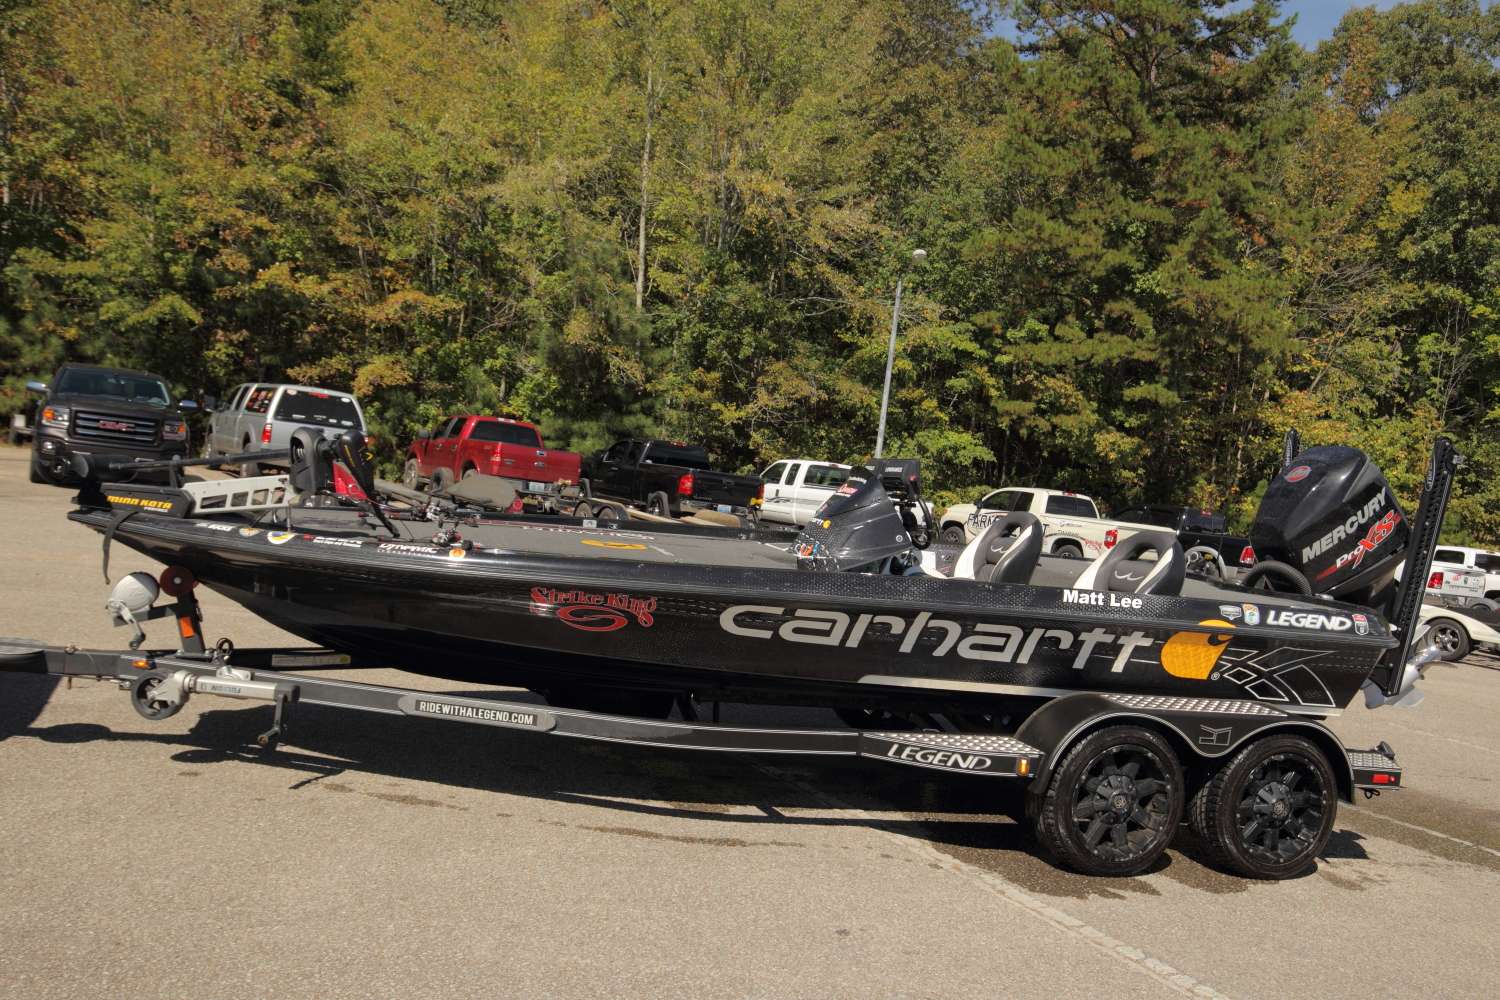 During the 2015 season, Lee fished in a 2015 Legend V20 boat equipped with a high performance 250 Mercury Pro XS motor.